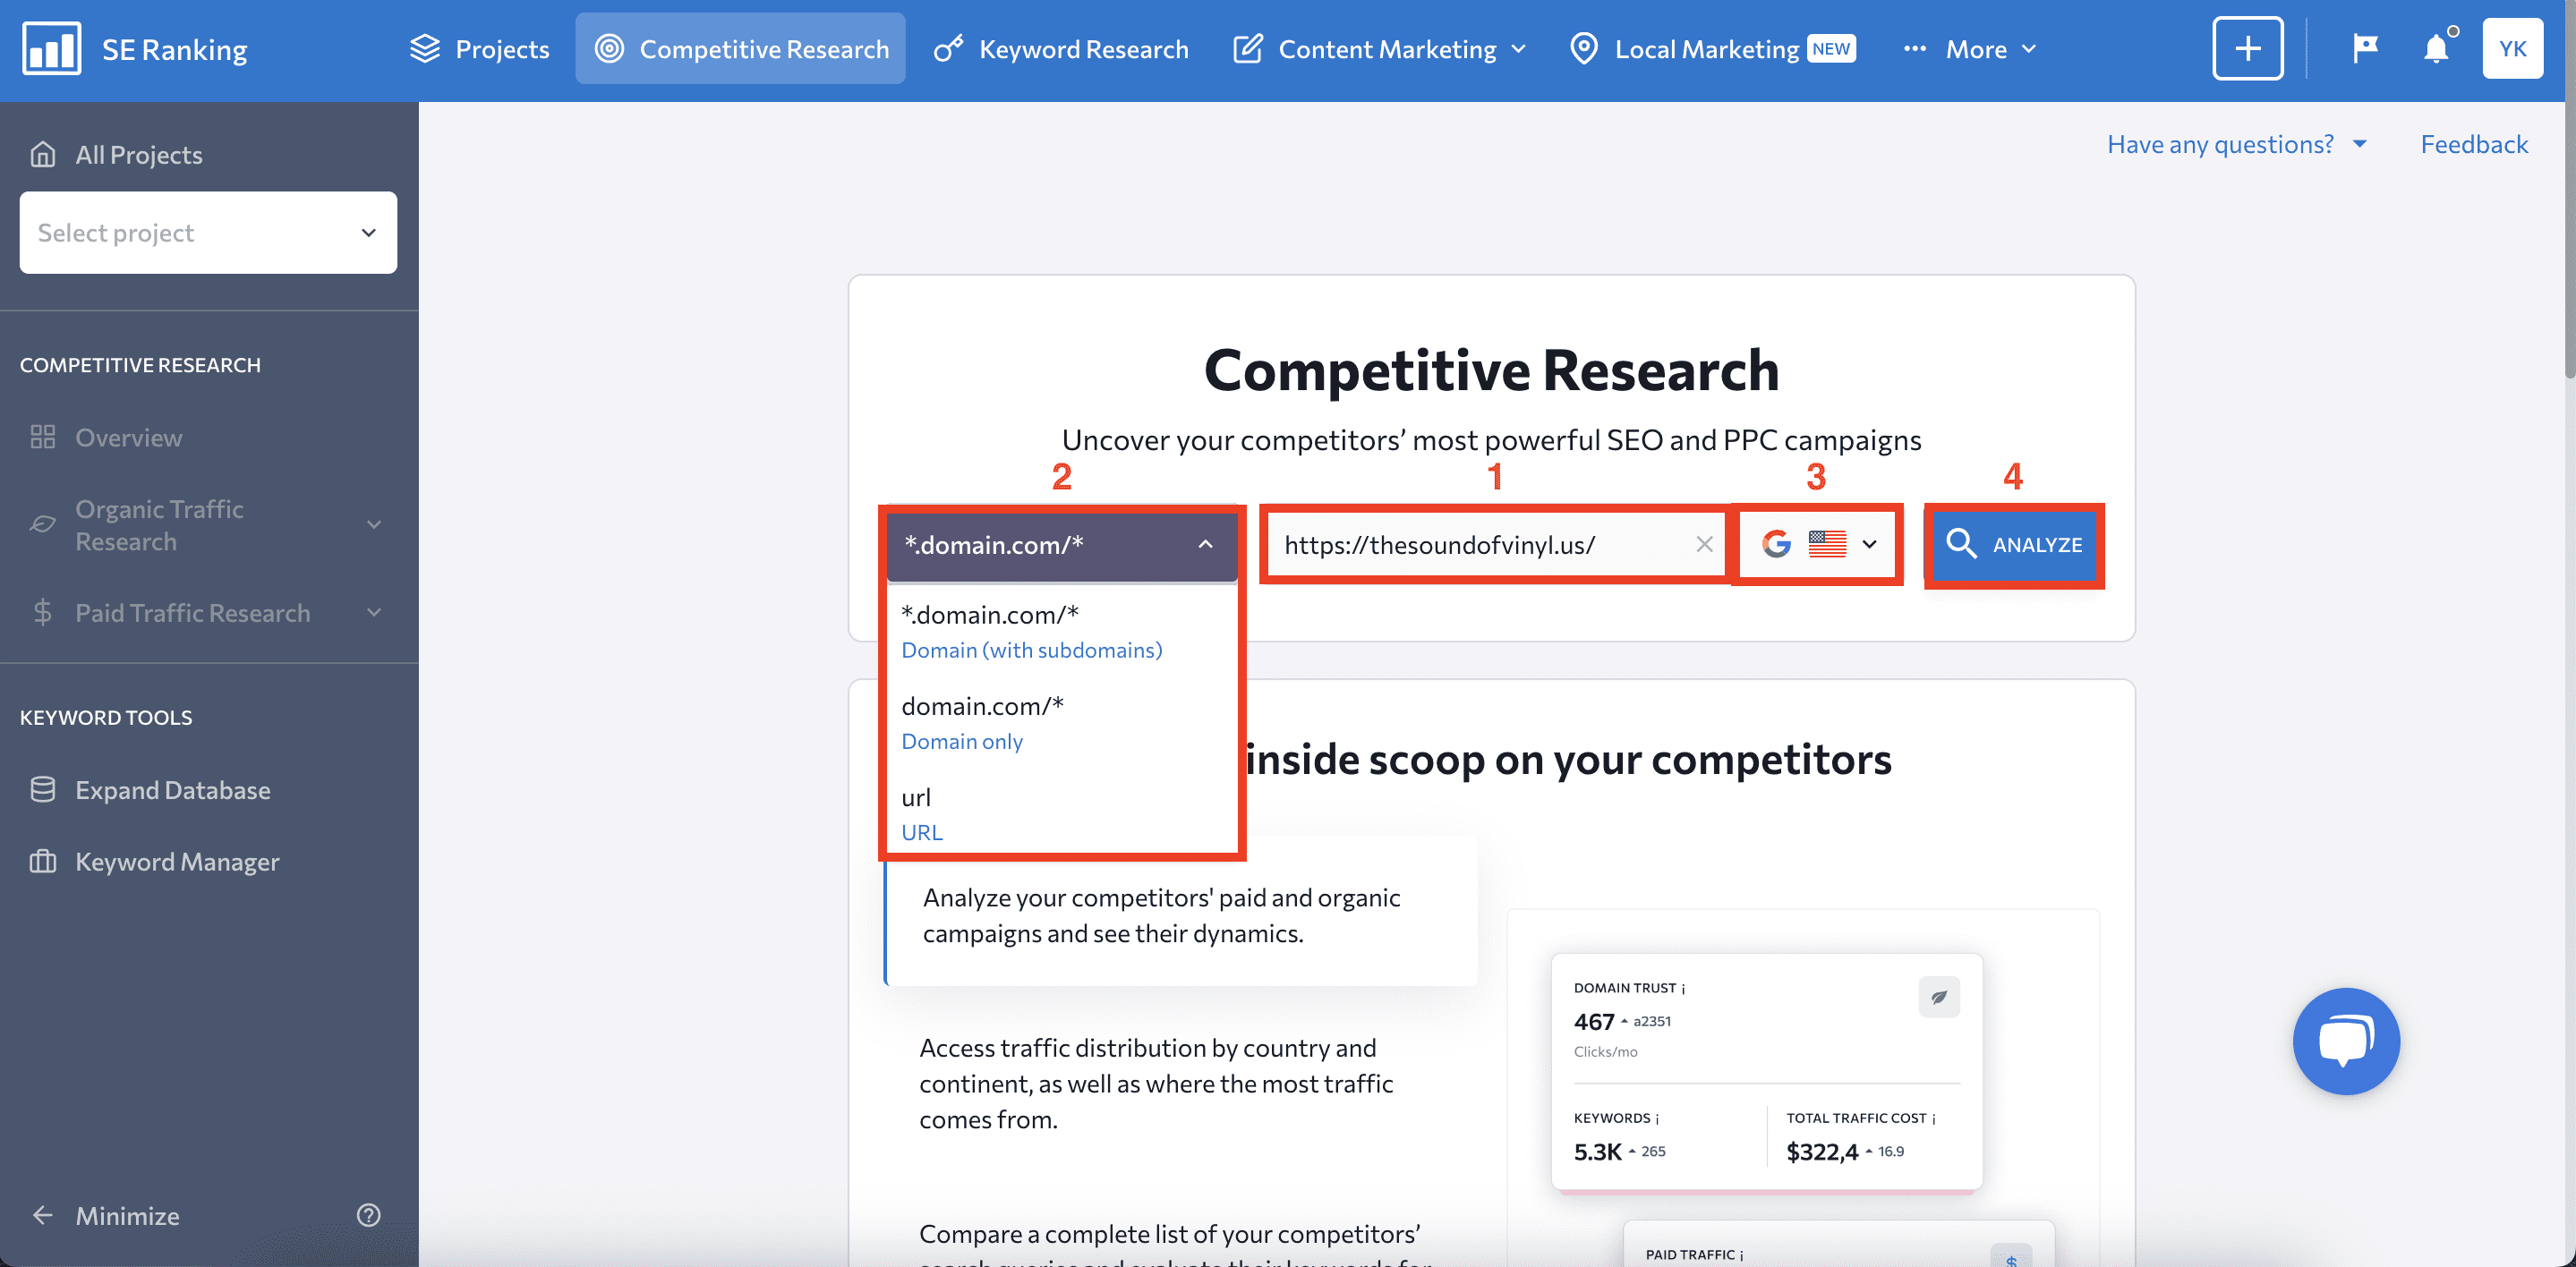 Input information for competitive research